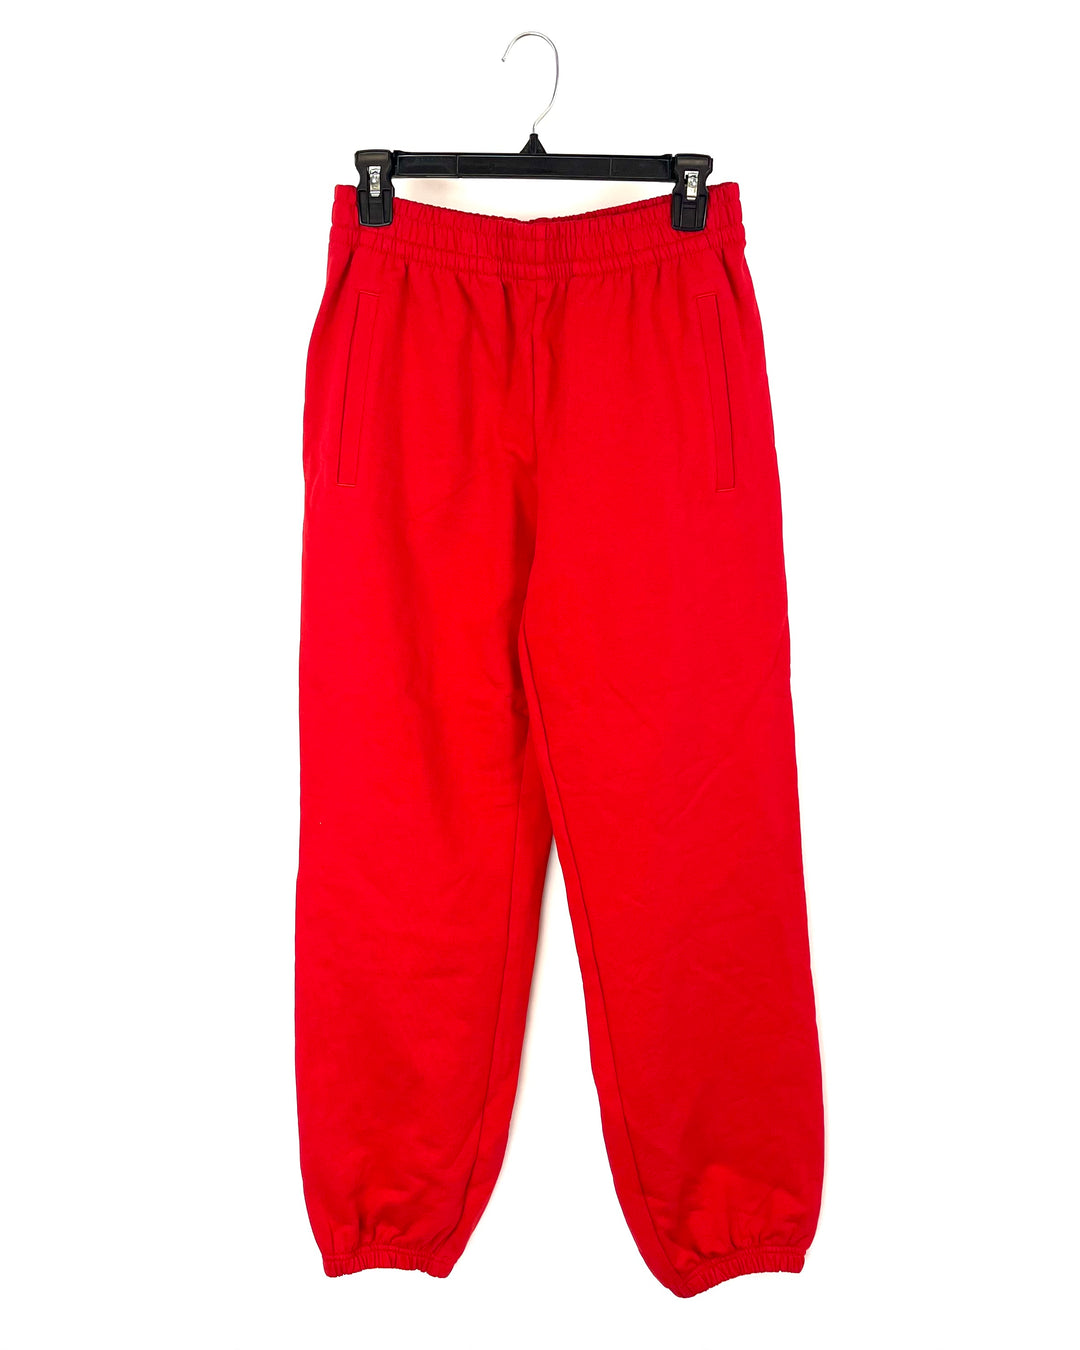 Red Athletic Sweatpants - Small